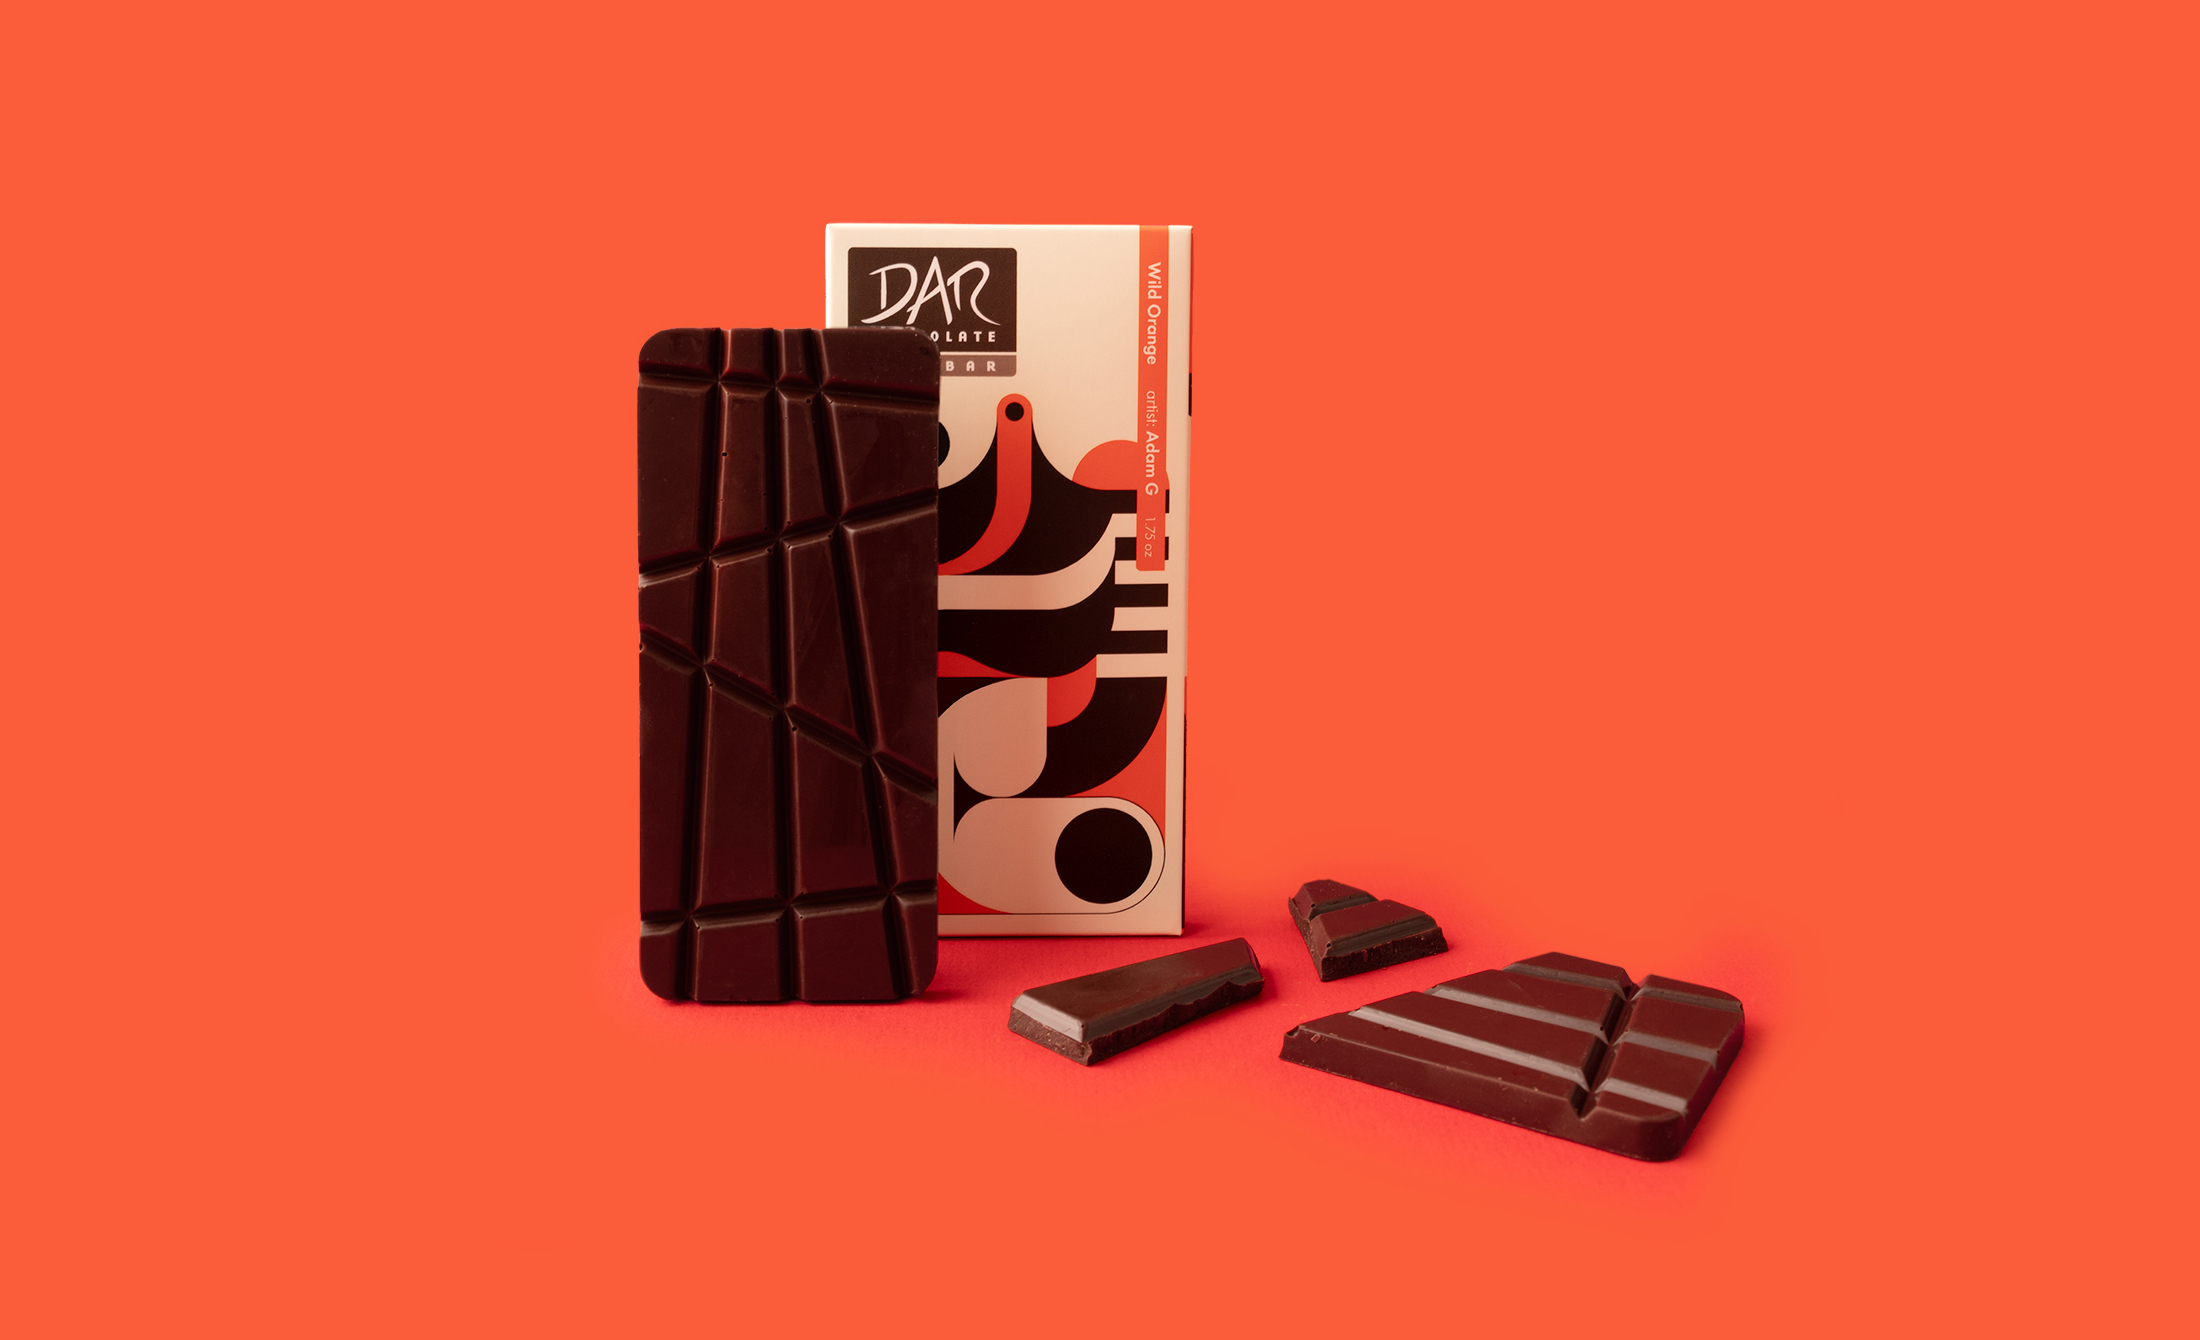 DAR chocolate bar in front of its packaging with 23 design and pieces of chocolate on orange baccground